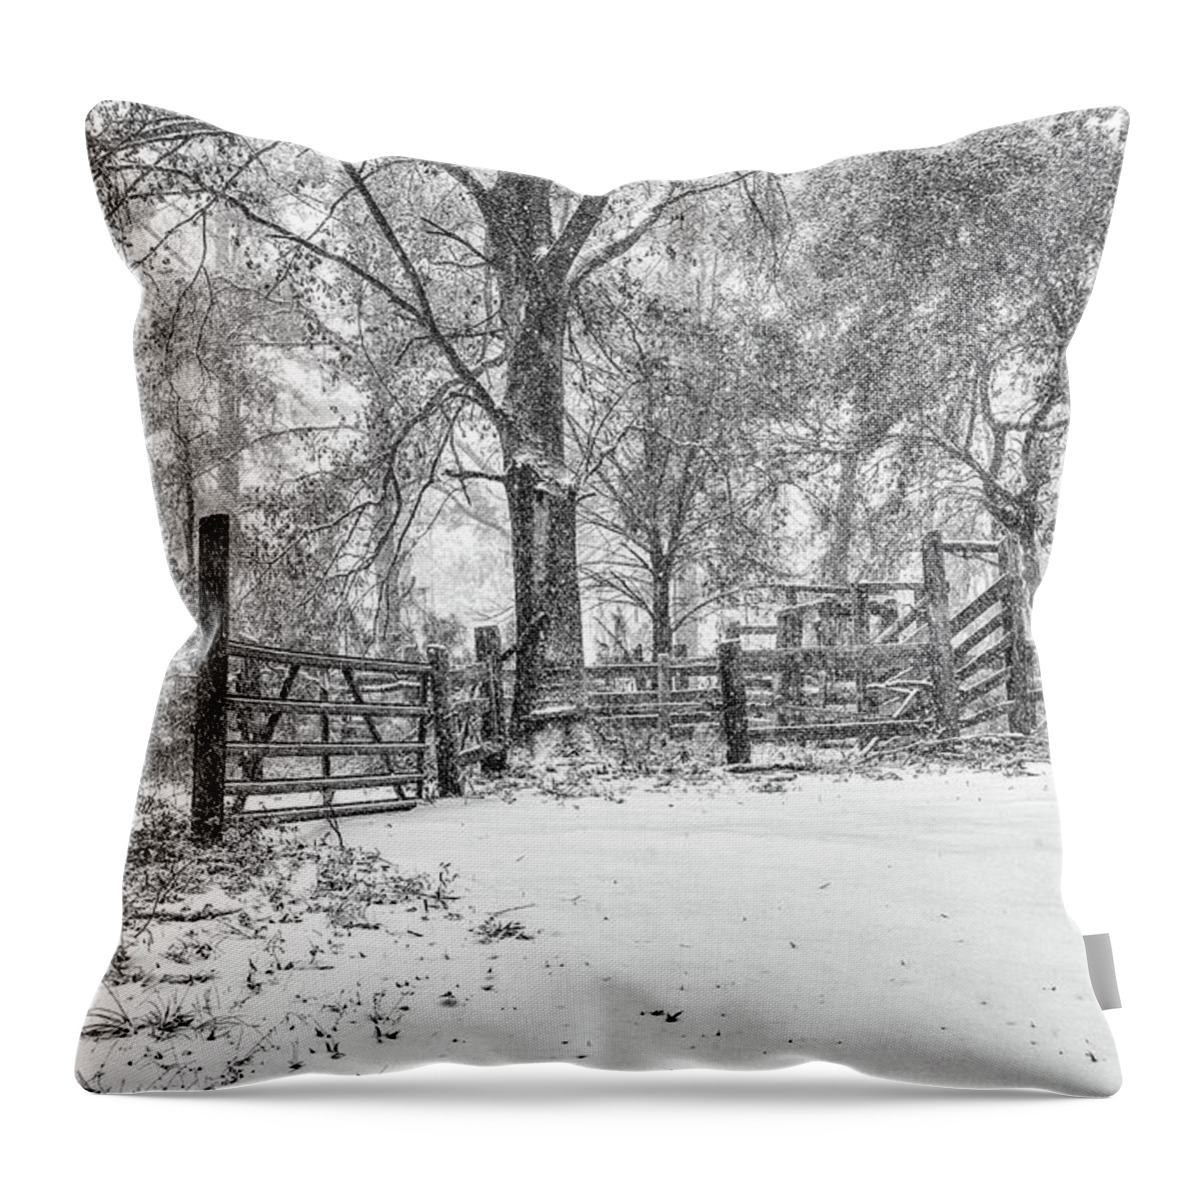 Chisolm Throw Pillow featuring the photograph Cow Pen Snow Scene by Scott Hansen